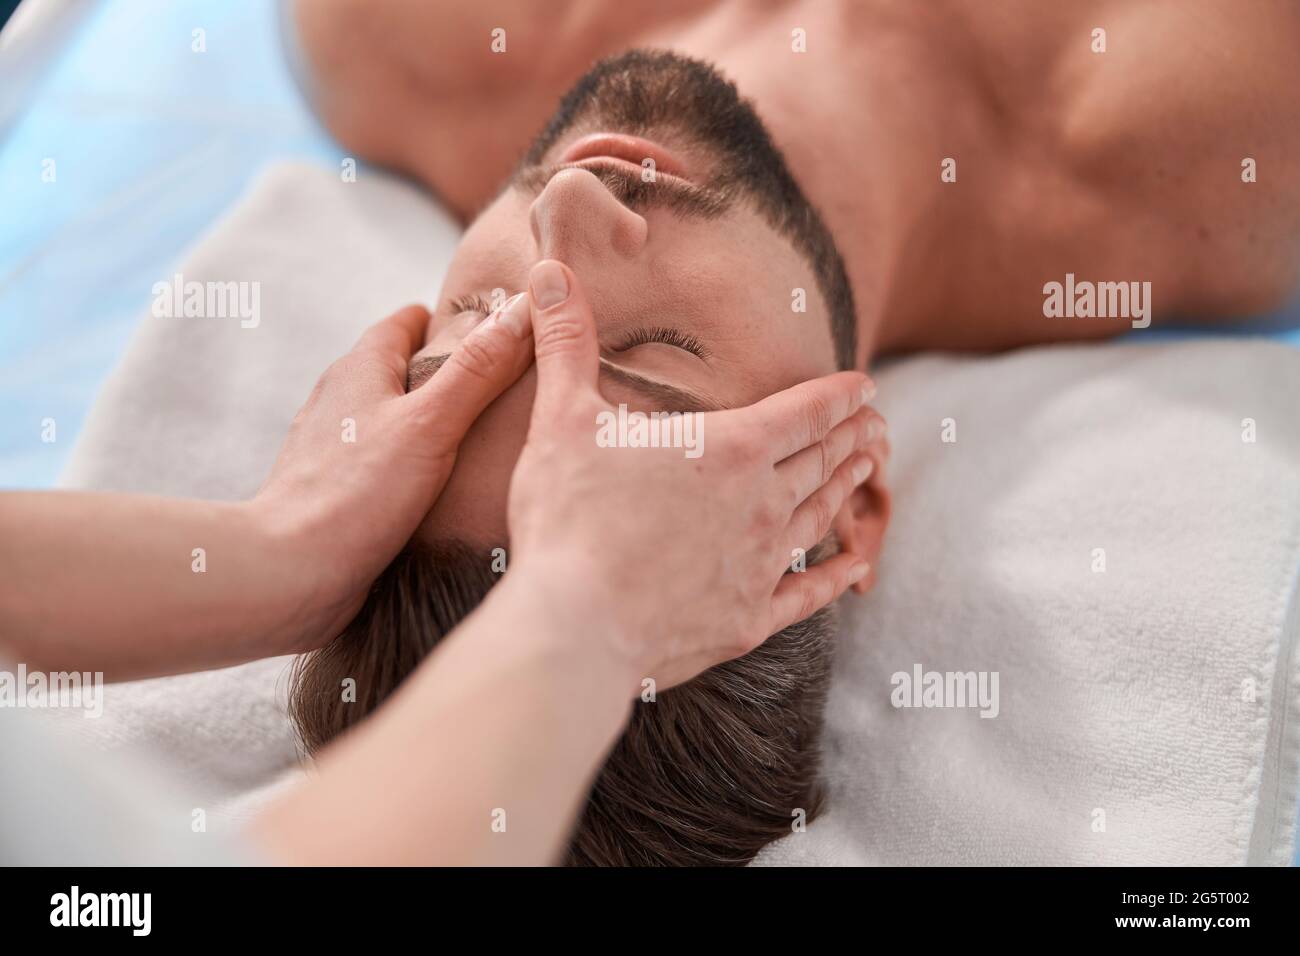 Woman massage therapist works with head of client lying on comfortable couch in spa salon Stock Photo